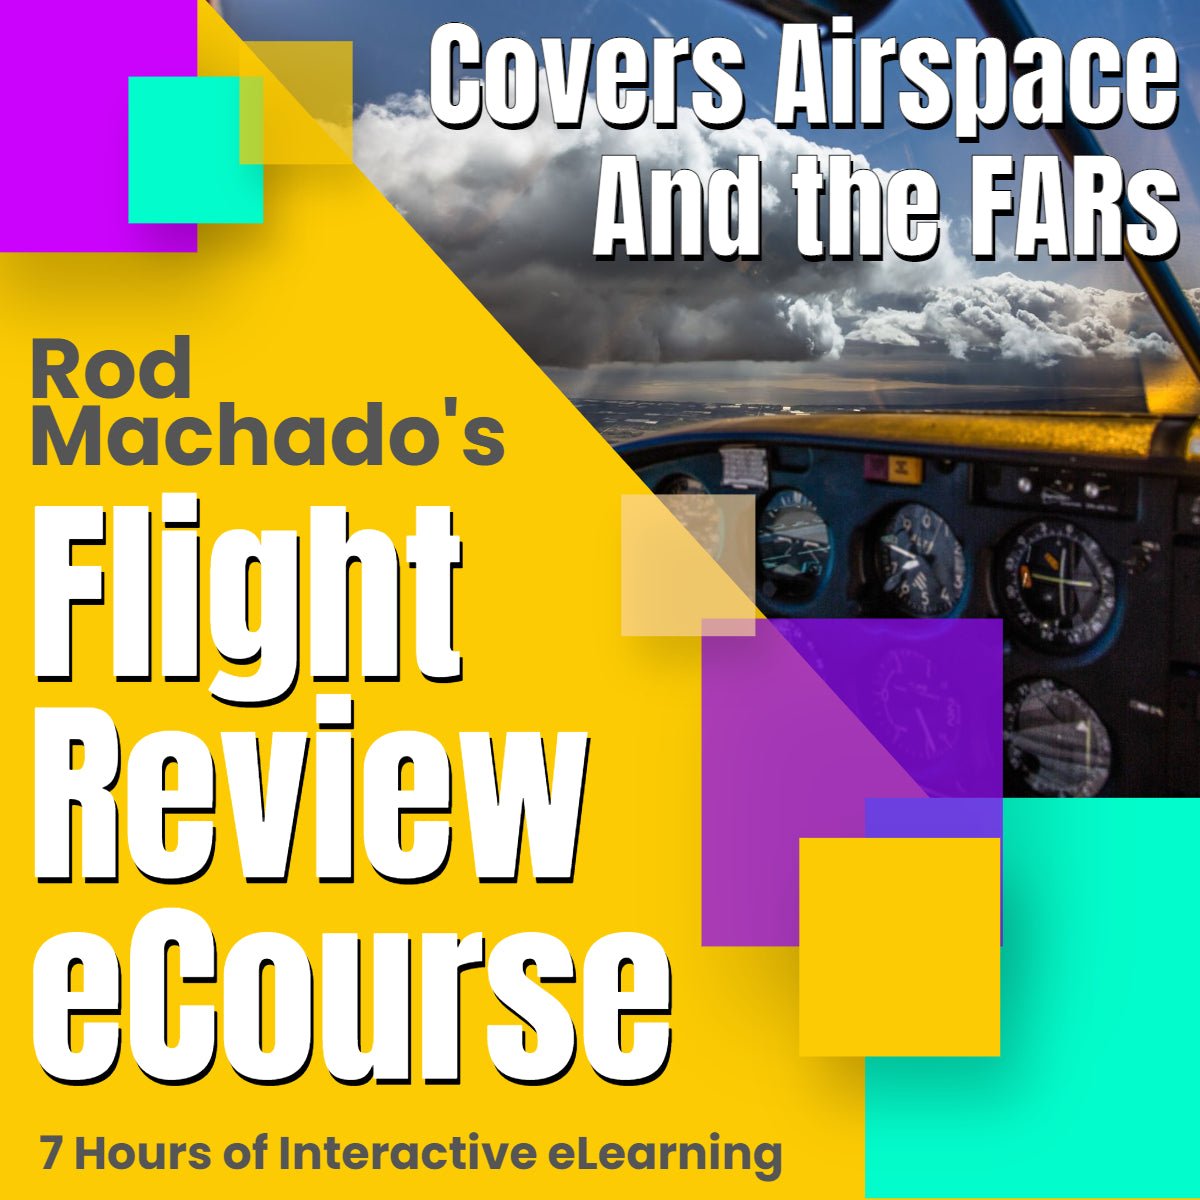 Covers Flight Review eLearning Course Bundle airspace and the far. (Brand Name: Rod Machado)